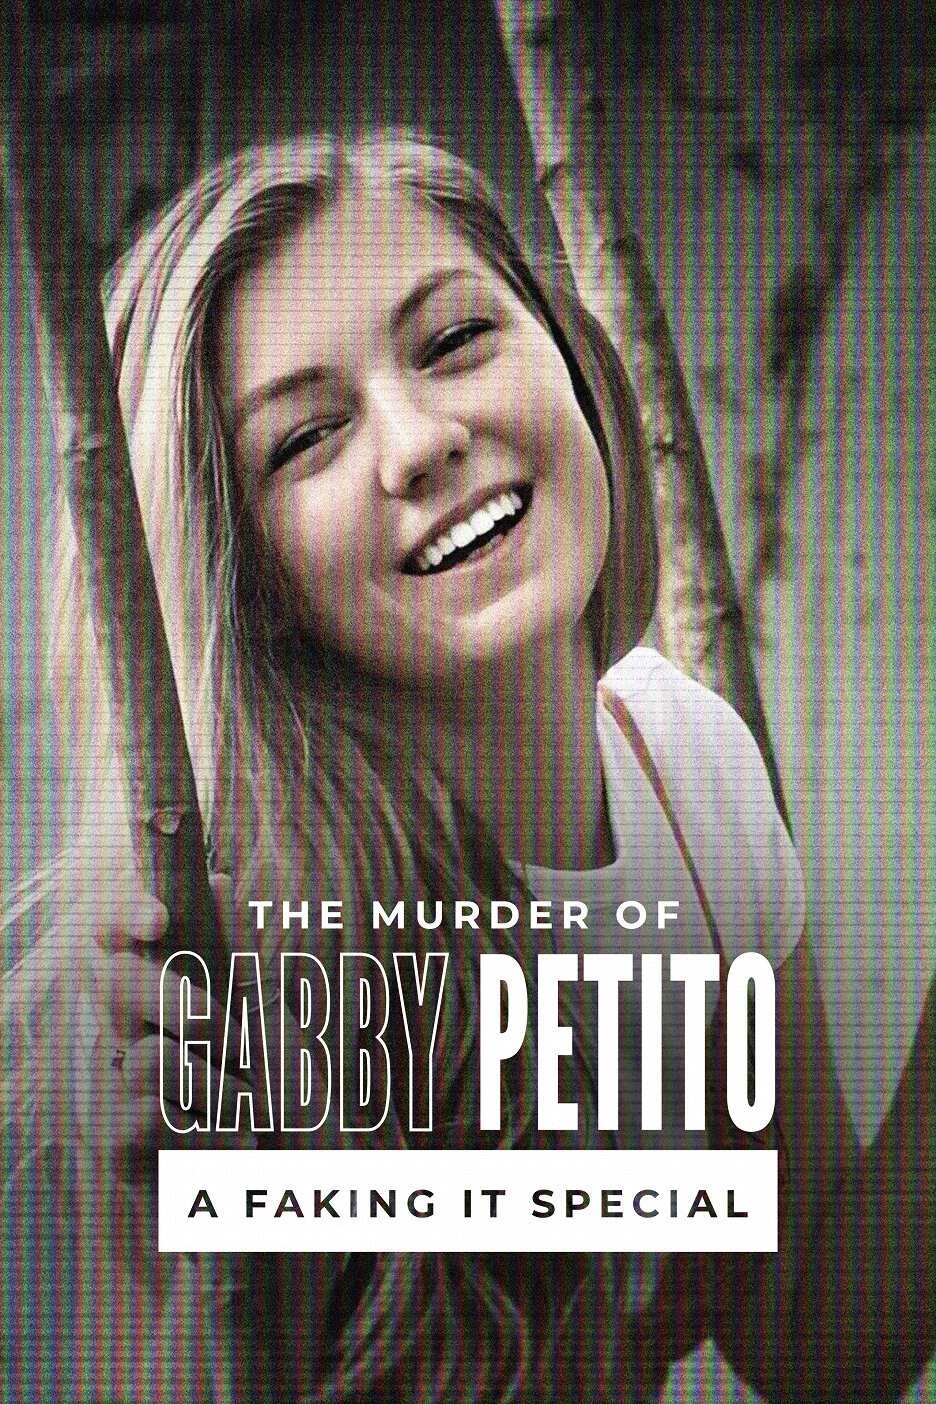 Documentary The Murder of Gabby Petito: Truth, Lies and Social Media